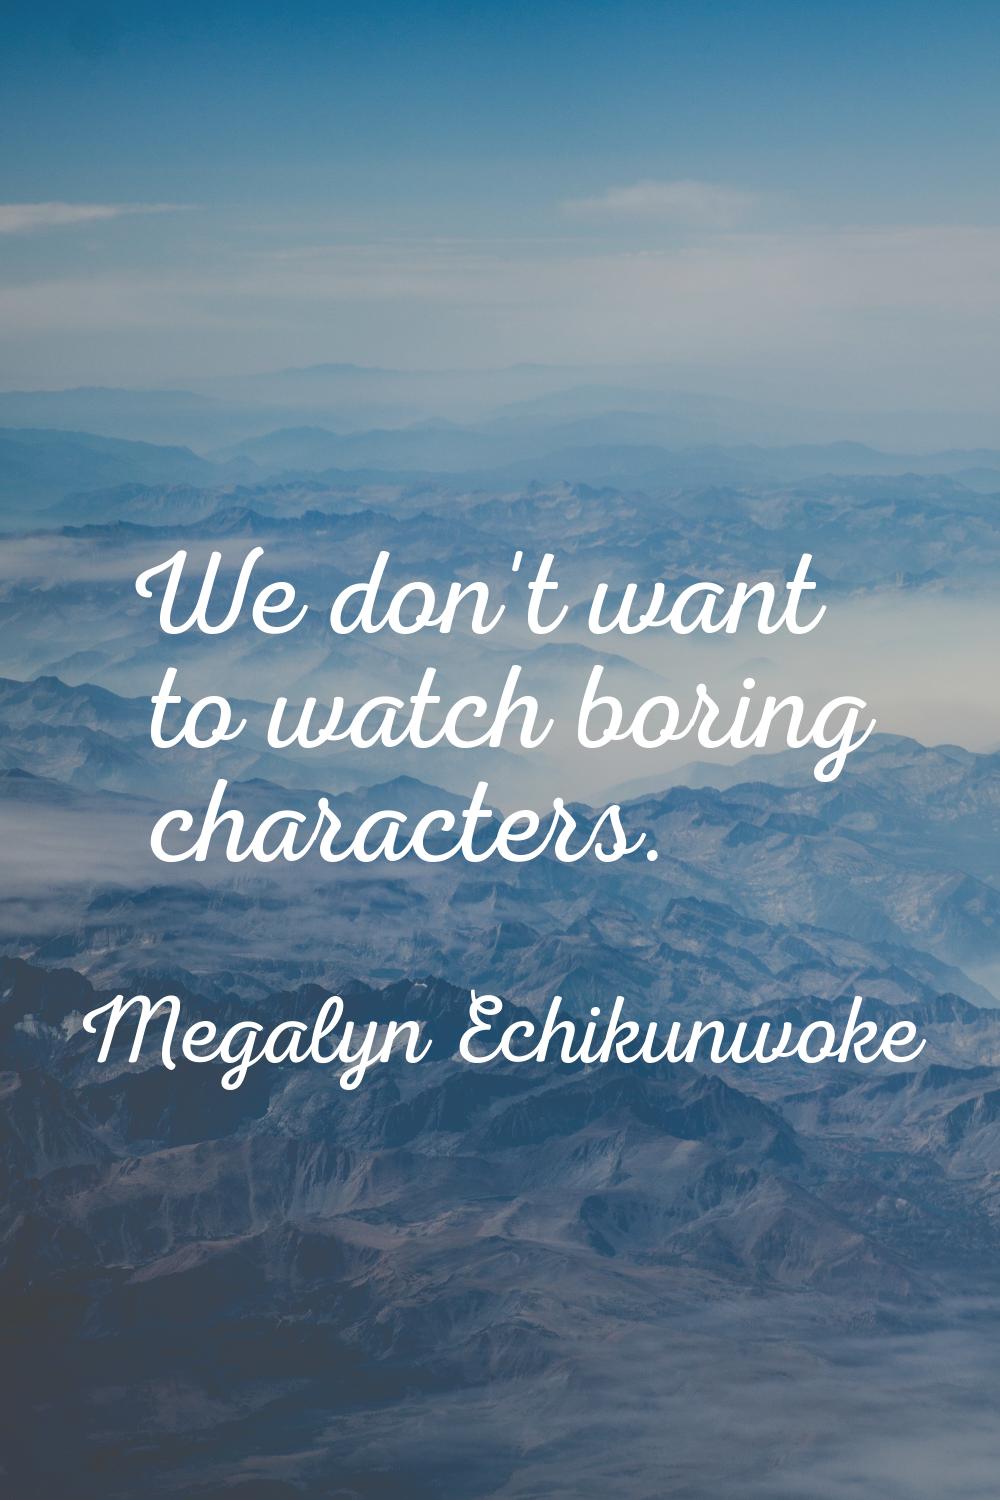 We don't want to watch boring characters.